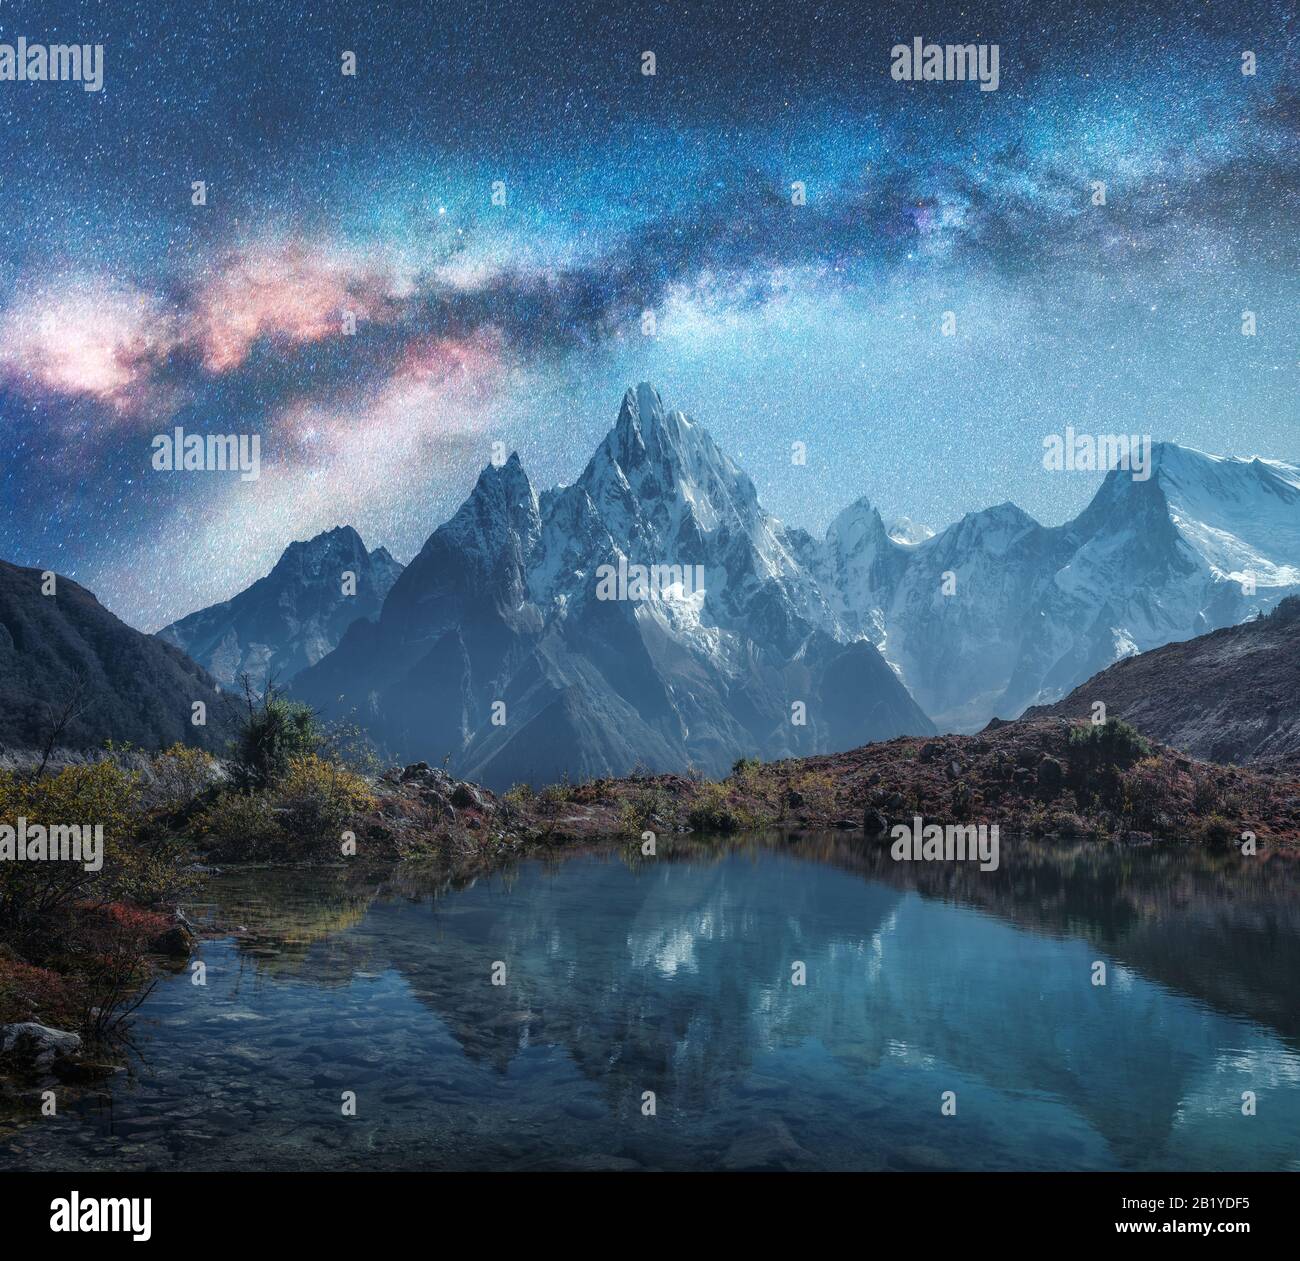 Milky Way over snowy mountains and lake at night. Landscape Stock Photo